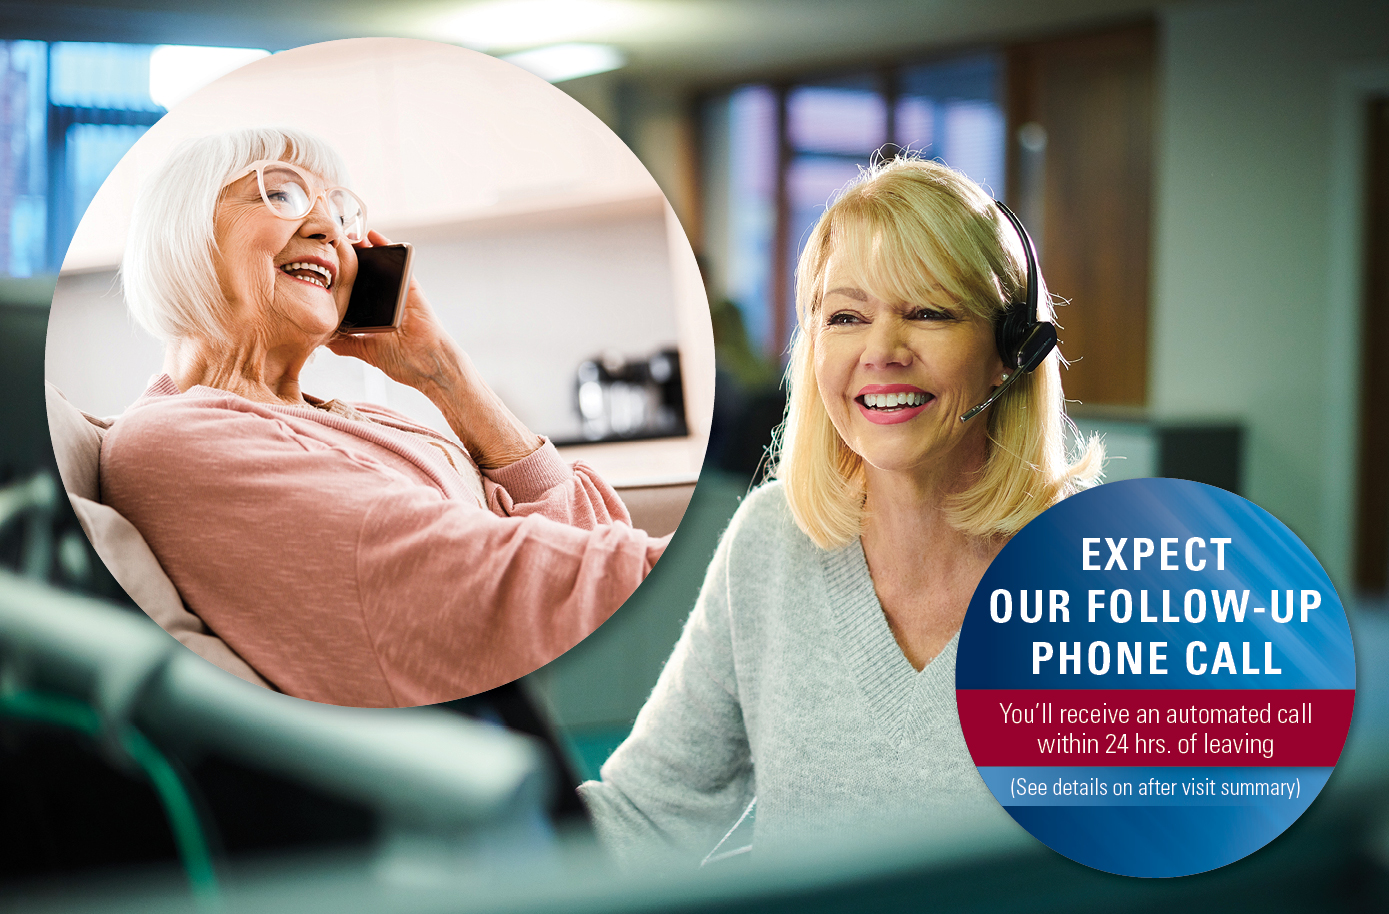 Smiling woman sits at computer wearing telephone headset. Inset photo shows older woman smiling and speaking into a mobile phone. A circular graphic reads: Expect our follow-up phone call. You’ll receive an automated call within 24 hrs. of leaving. 